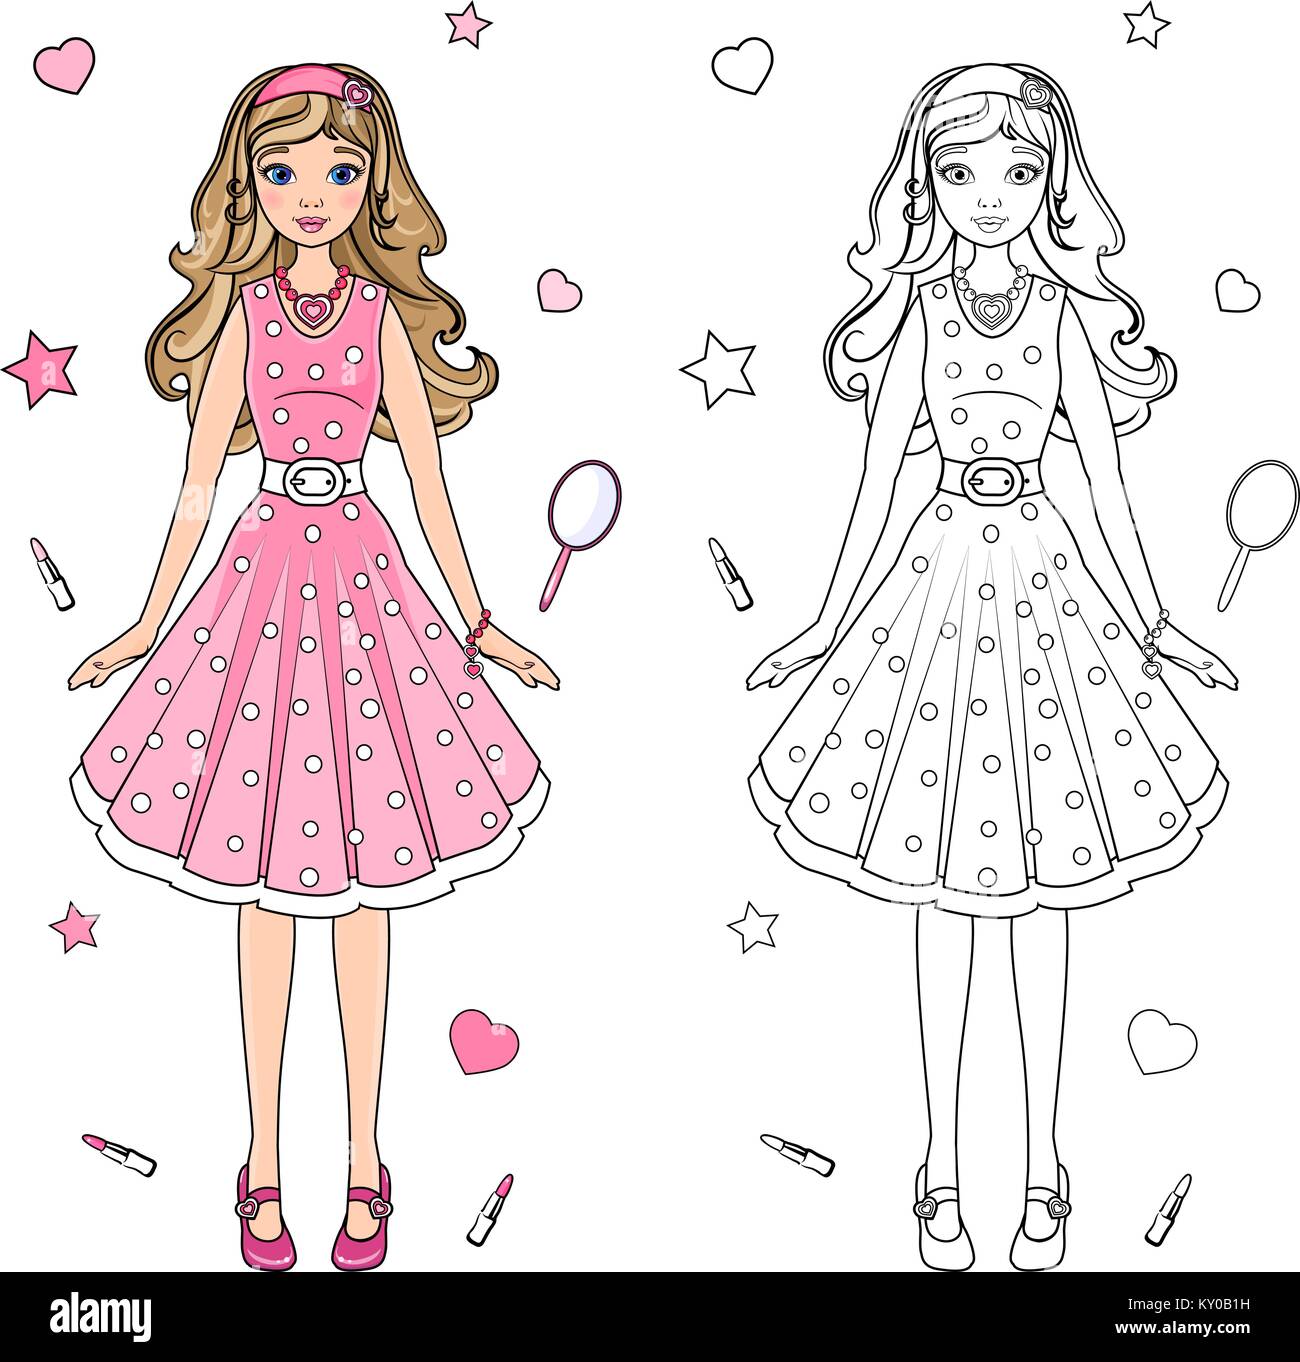 coloring book doll in a pink dress Stock Vector